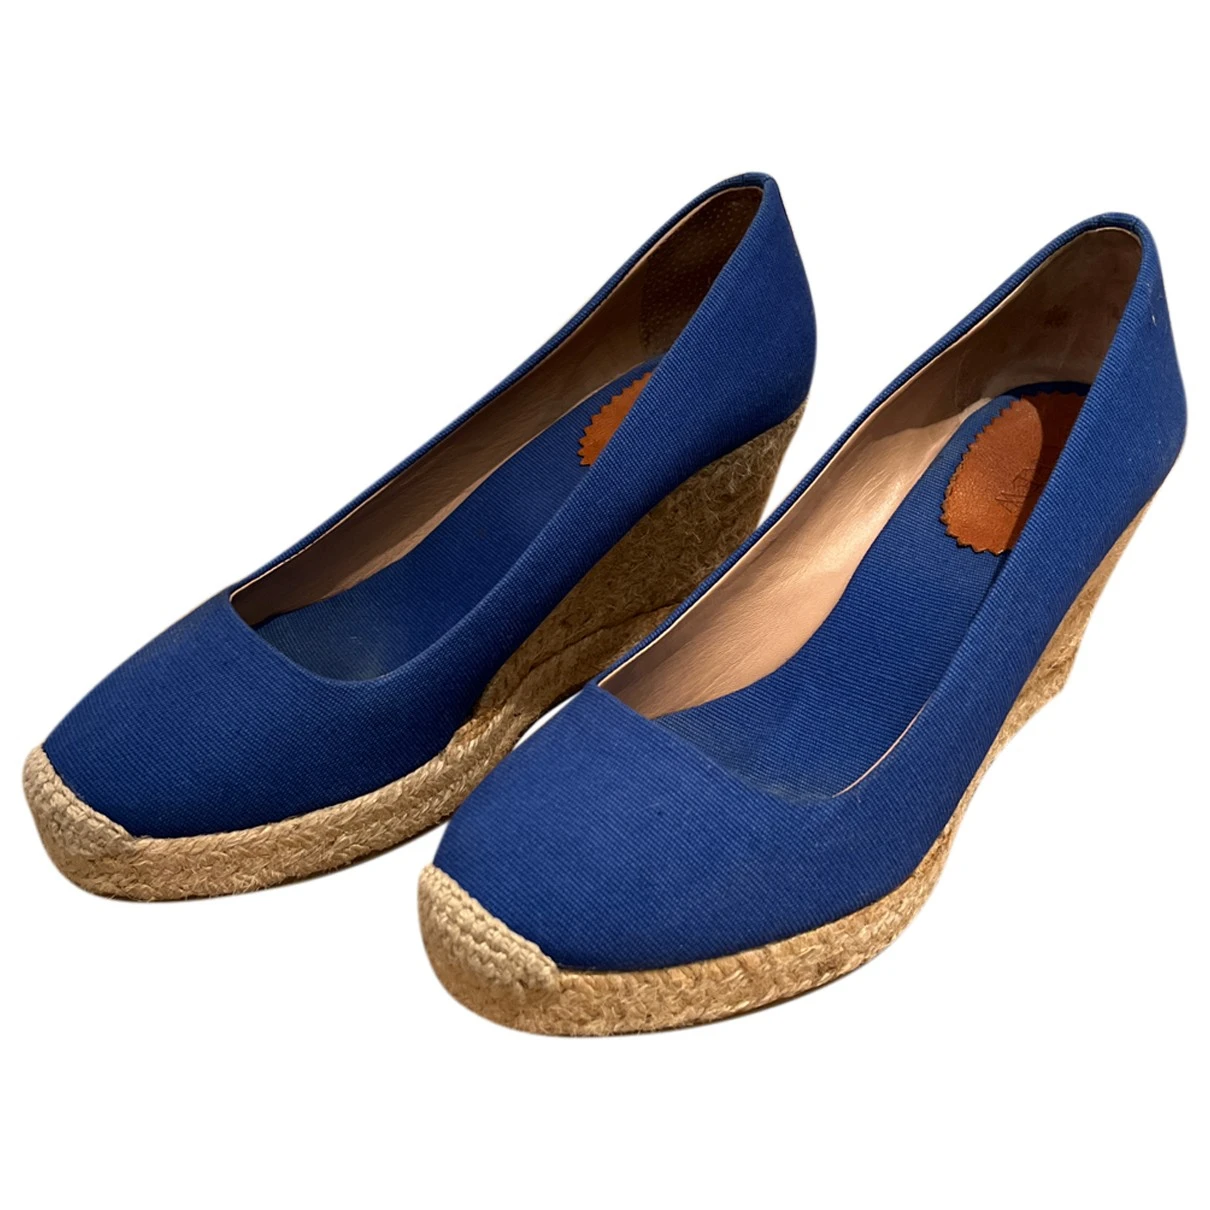 shoes J.Crew espadrilles for Female Cloth 9 US. Used condition